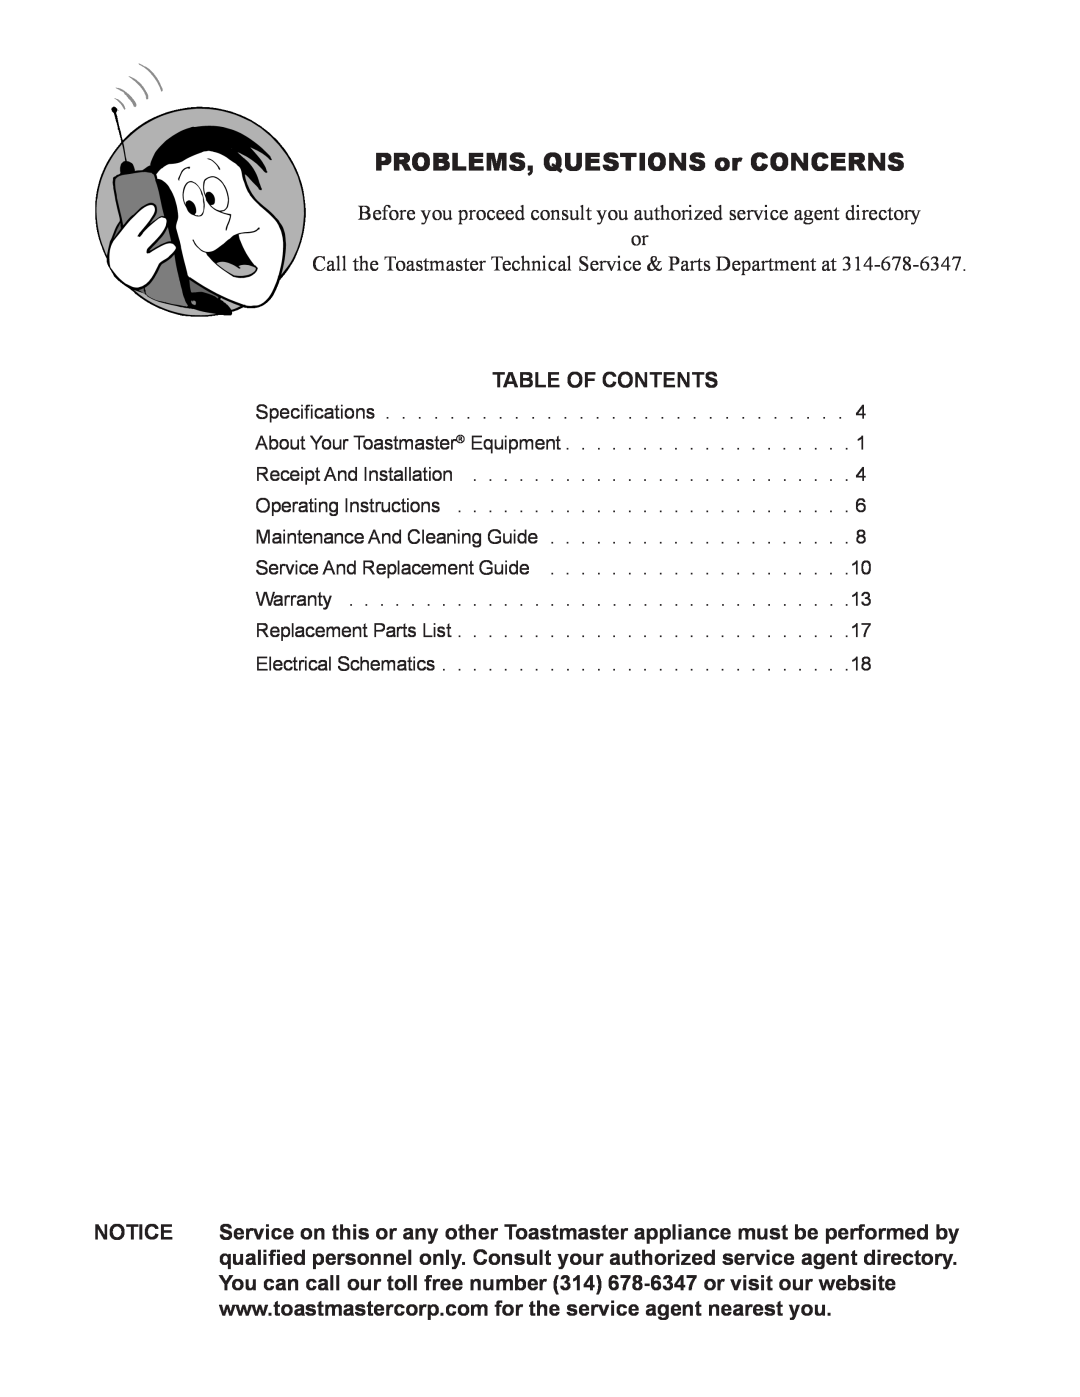 Toastmaster XO-1N manual Table Of Contents, You can call our toll free number 314 678-6347 or visit our website 